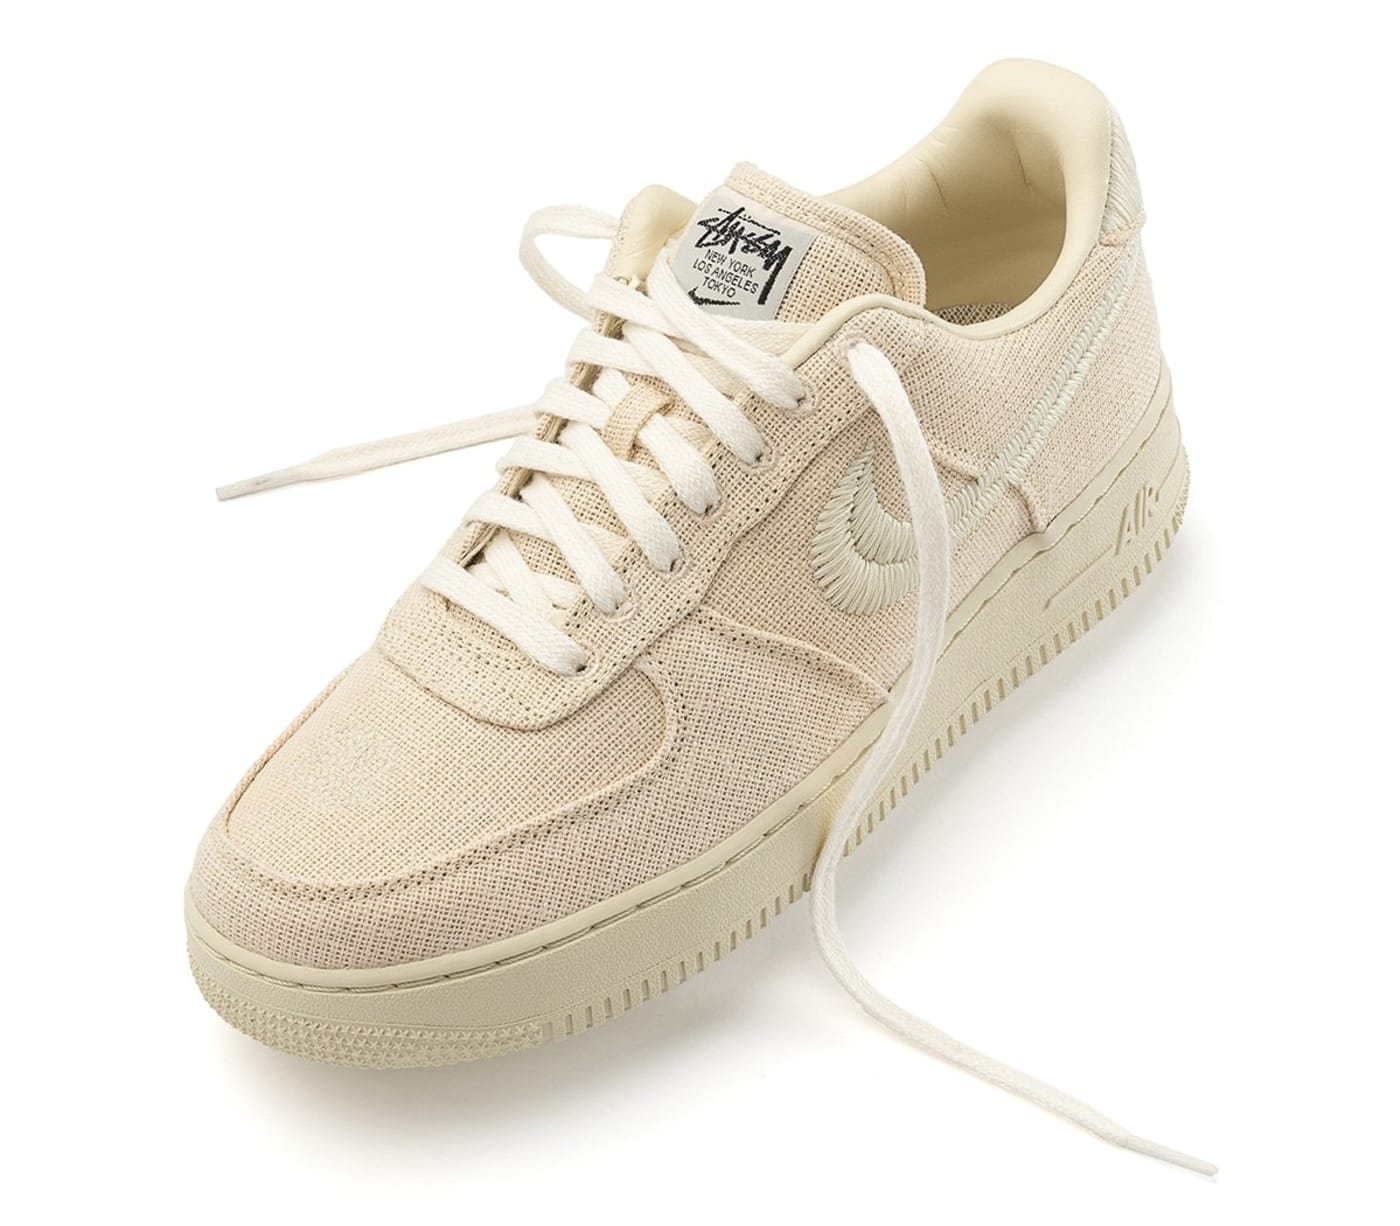 Stussy x Nike AF1 Low Collab: Where To Buy & Release Date | Complex